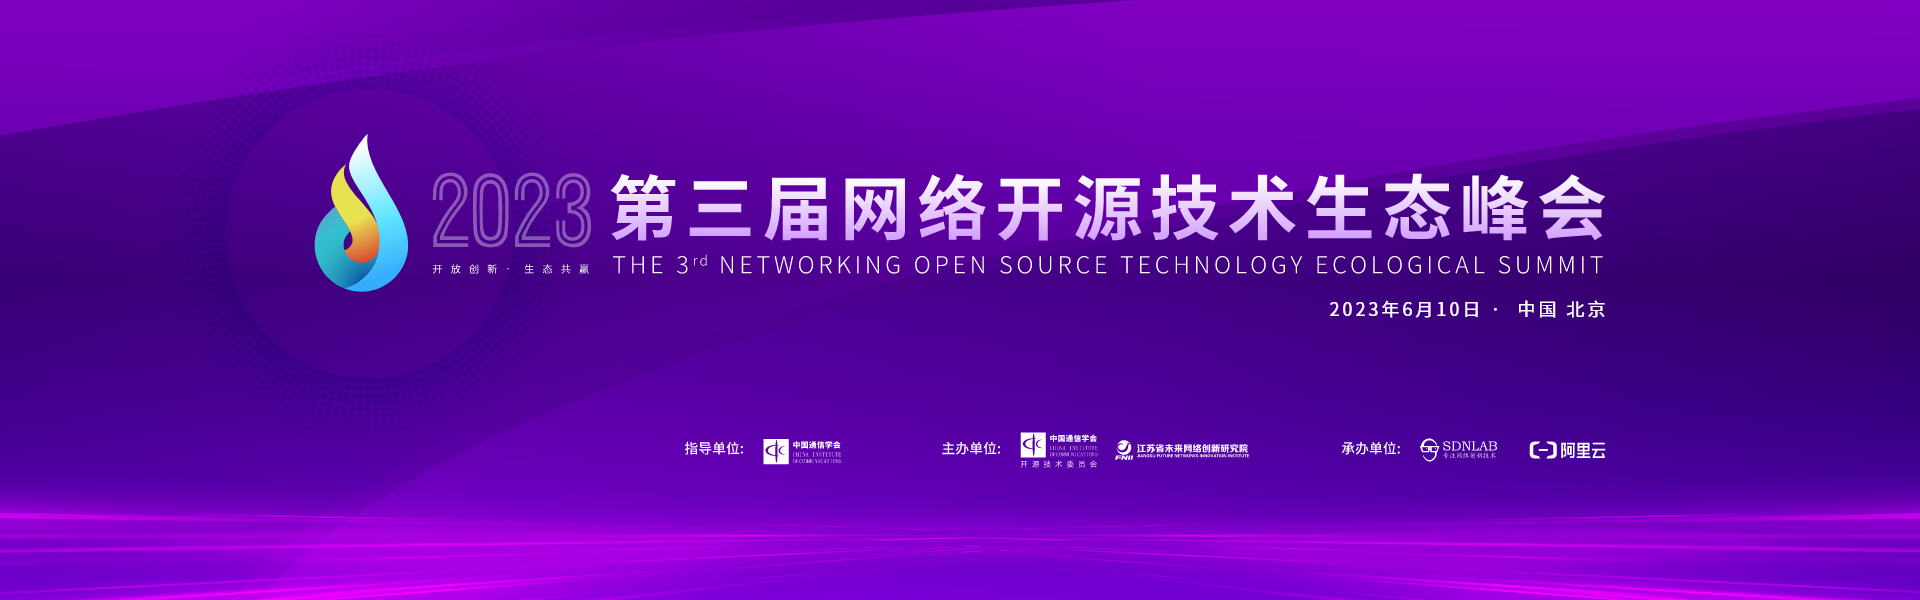 The 3rd Network Open Source Technology Ecological Summit